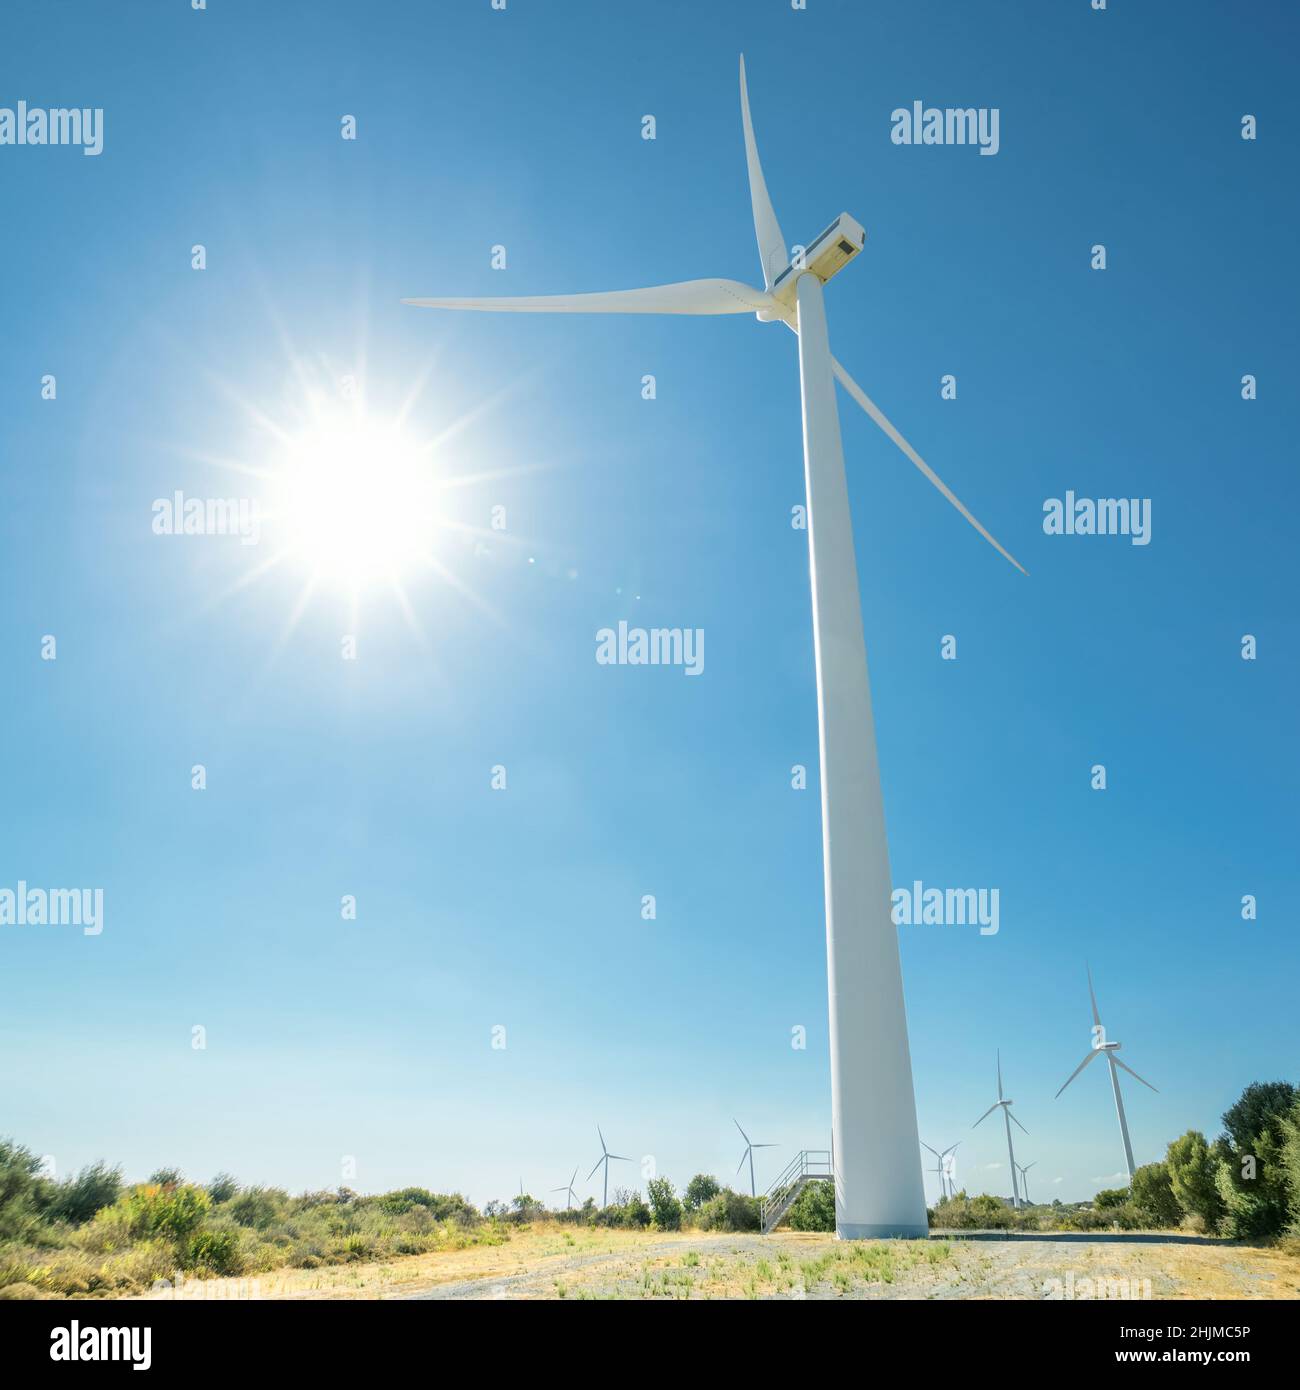 Huge wind generator against shining sun and blue sky. Oreites wind farm in Cyprus Stock Photo